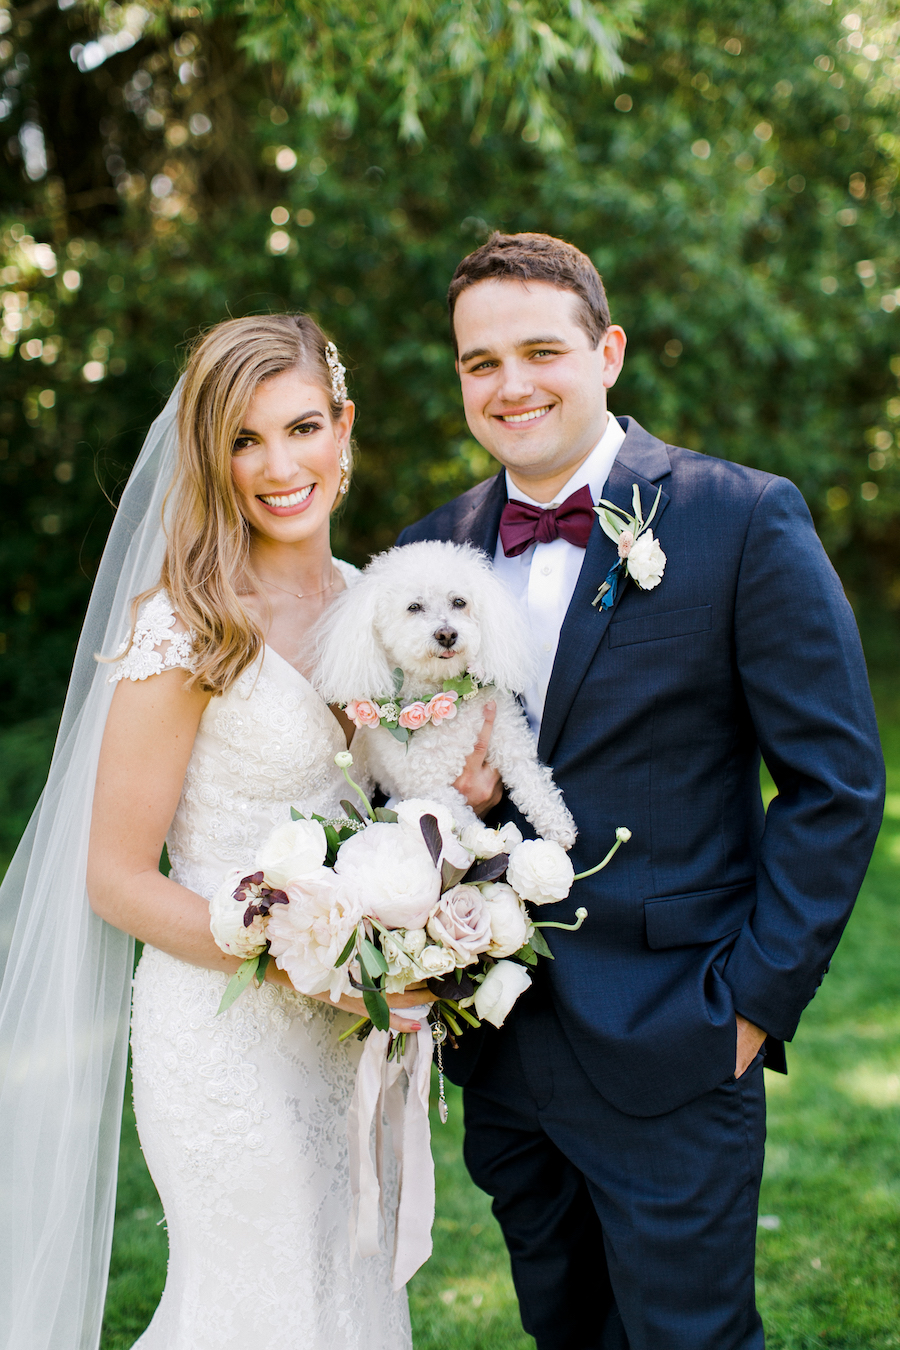 A bride, groom and their dog